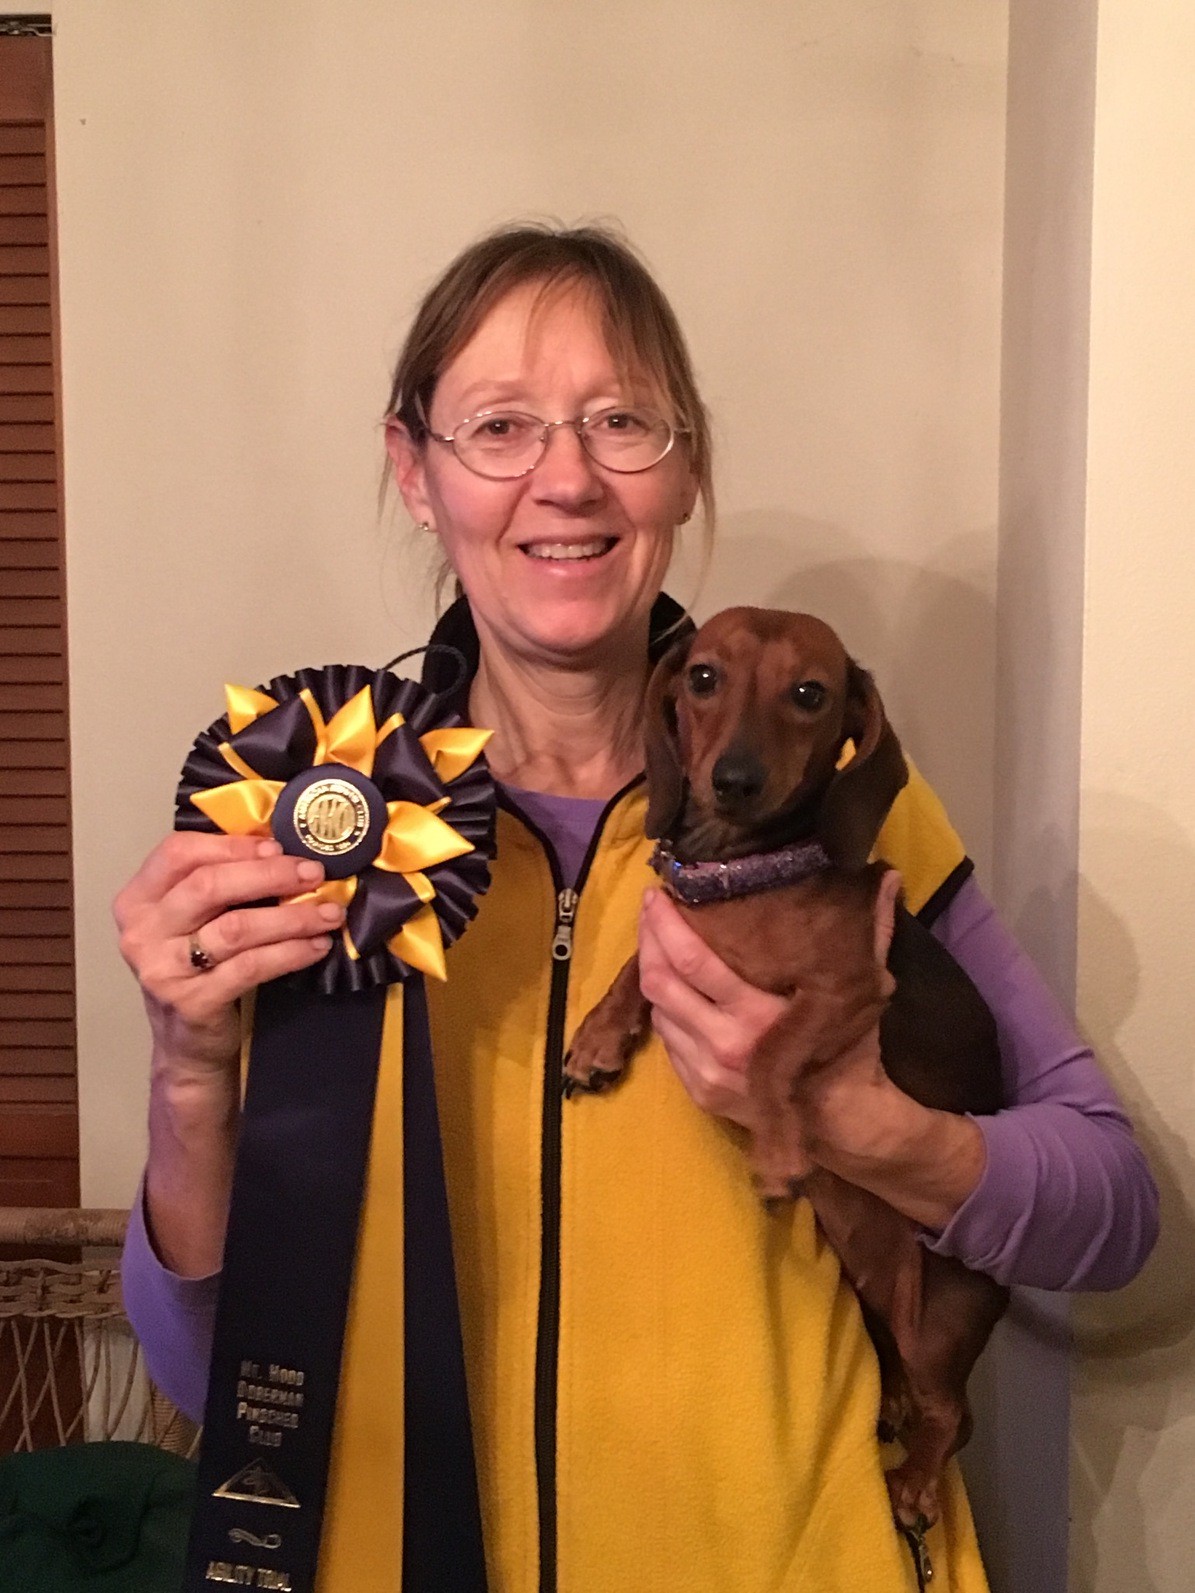 Mala earned highest scoring hound at the MHDPC Agility Trial.